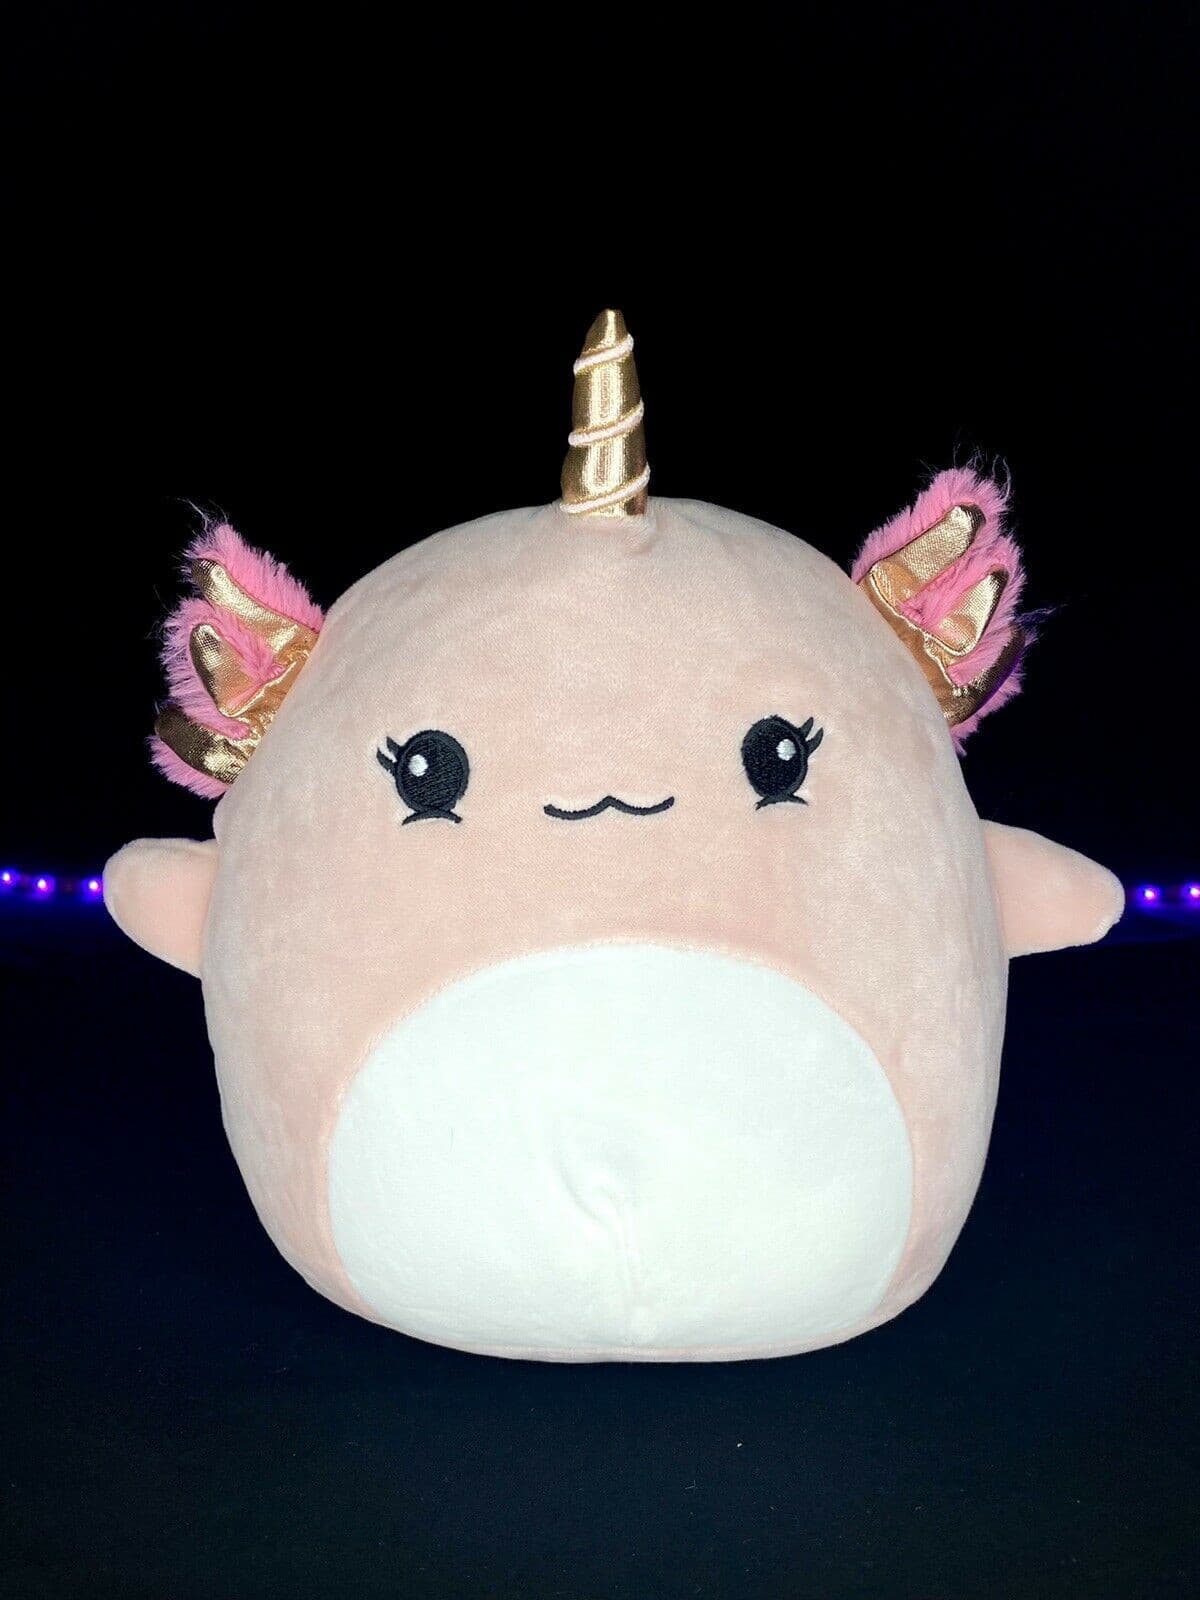 Squishmallow 8” Axolotl Mystery Squad Pink Unicorn Axolotl FRUIT SCENTED NEW | Sweet Magnolia Charms.